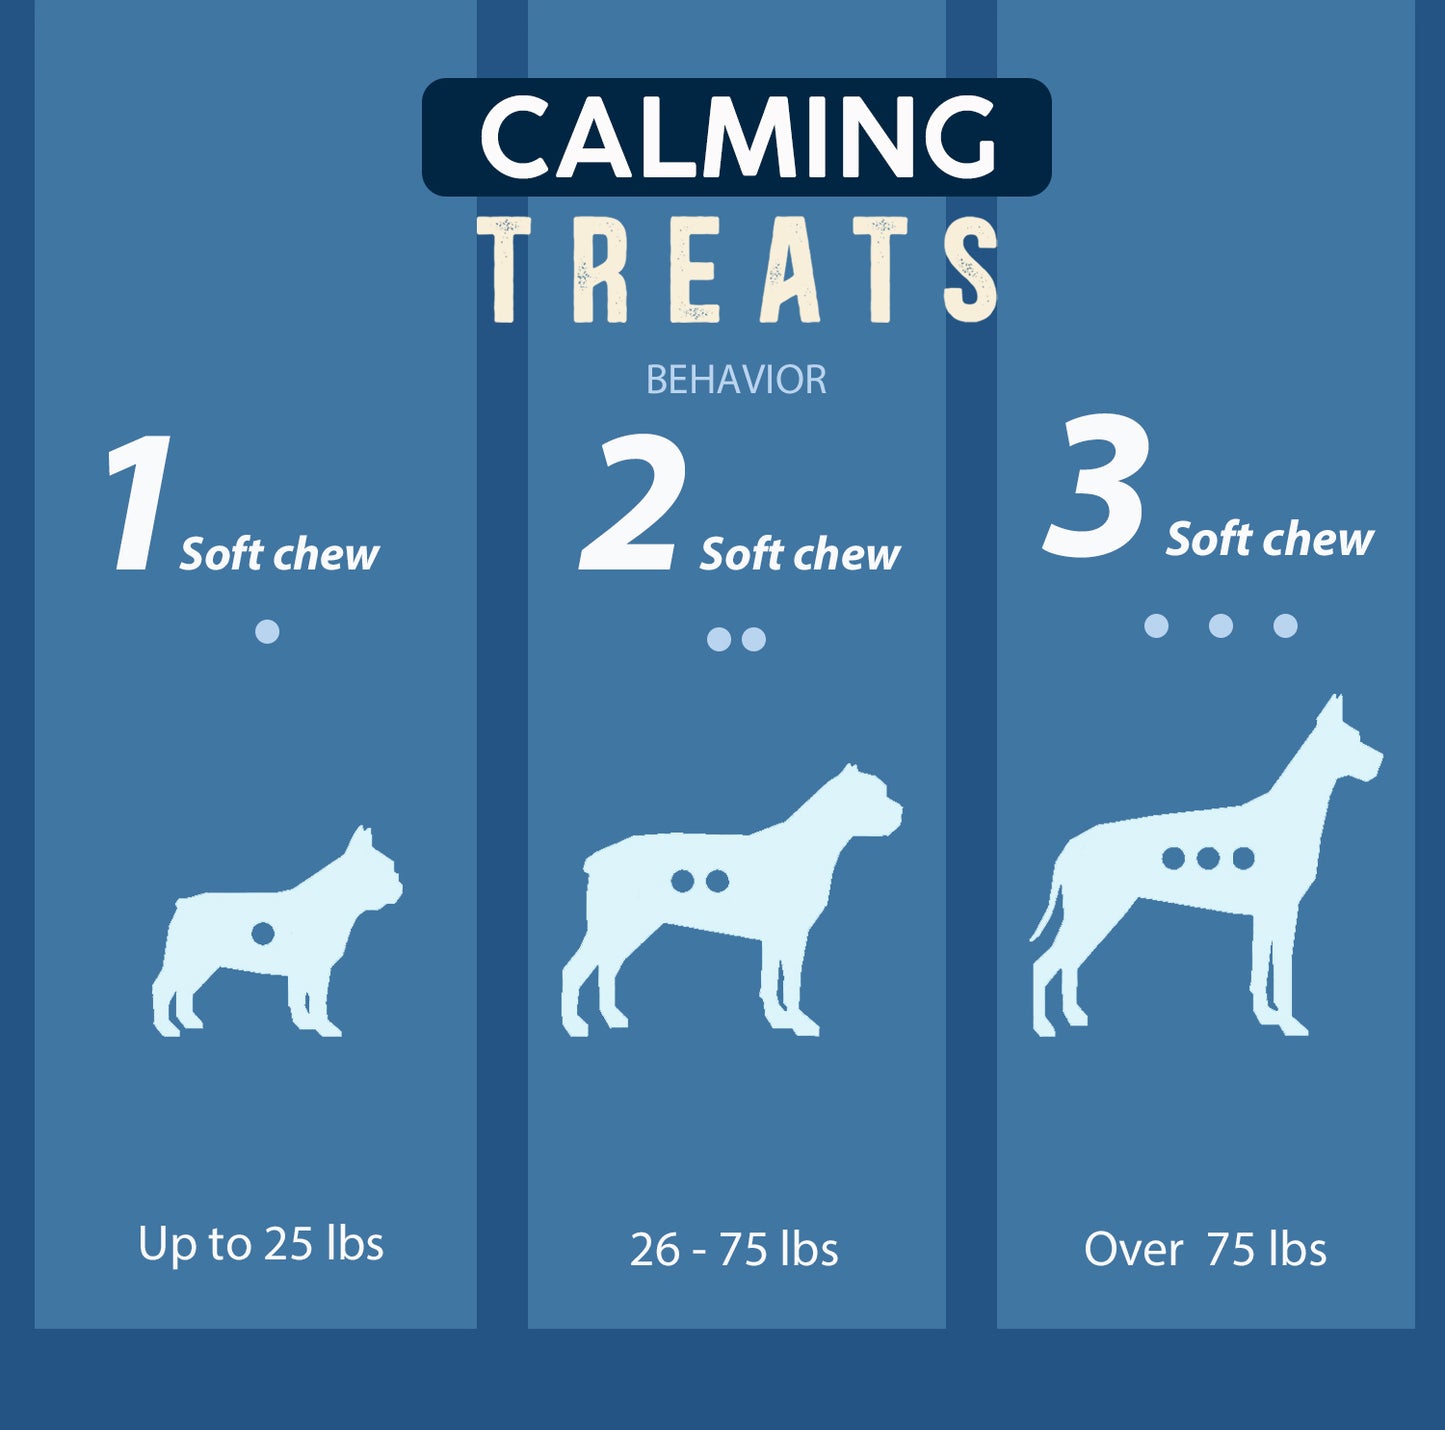 Calming Support Treats For Dogs 90 Chews - 12oz